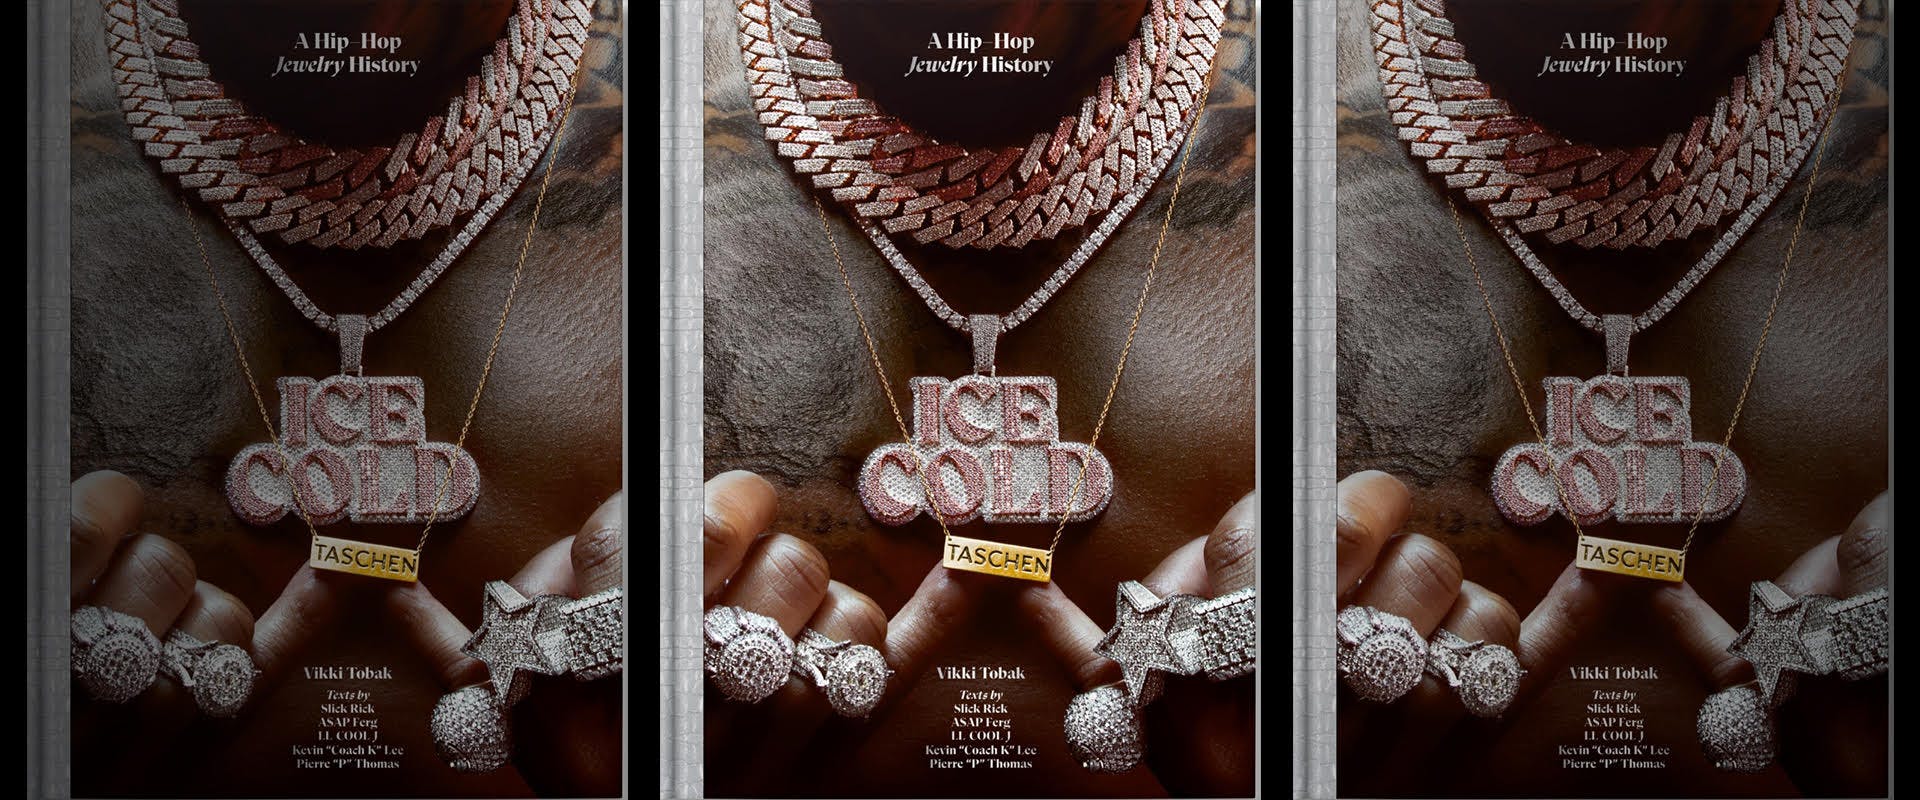 Bling: The Hip-hop Jewellery Book